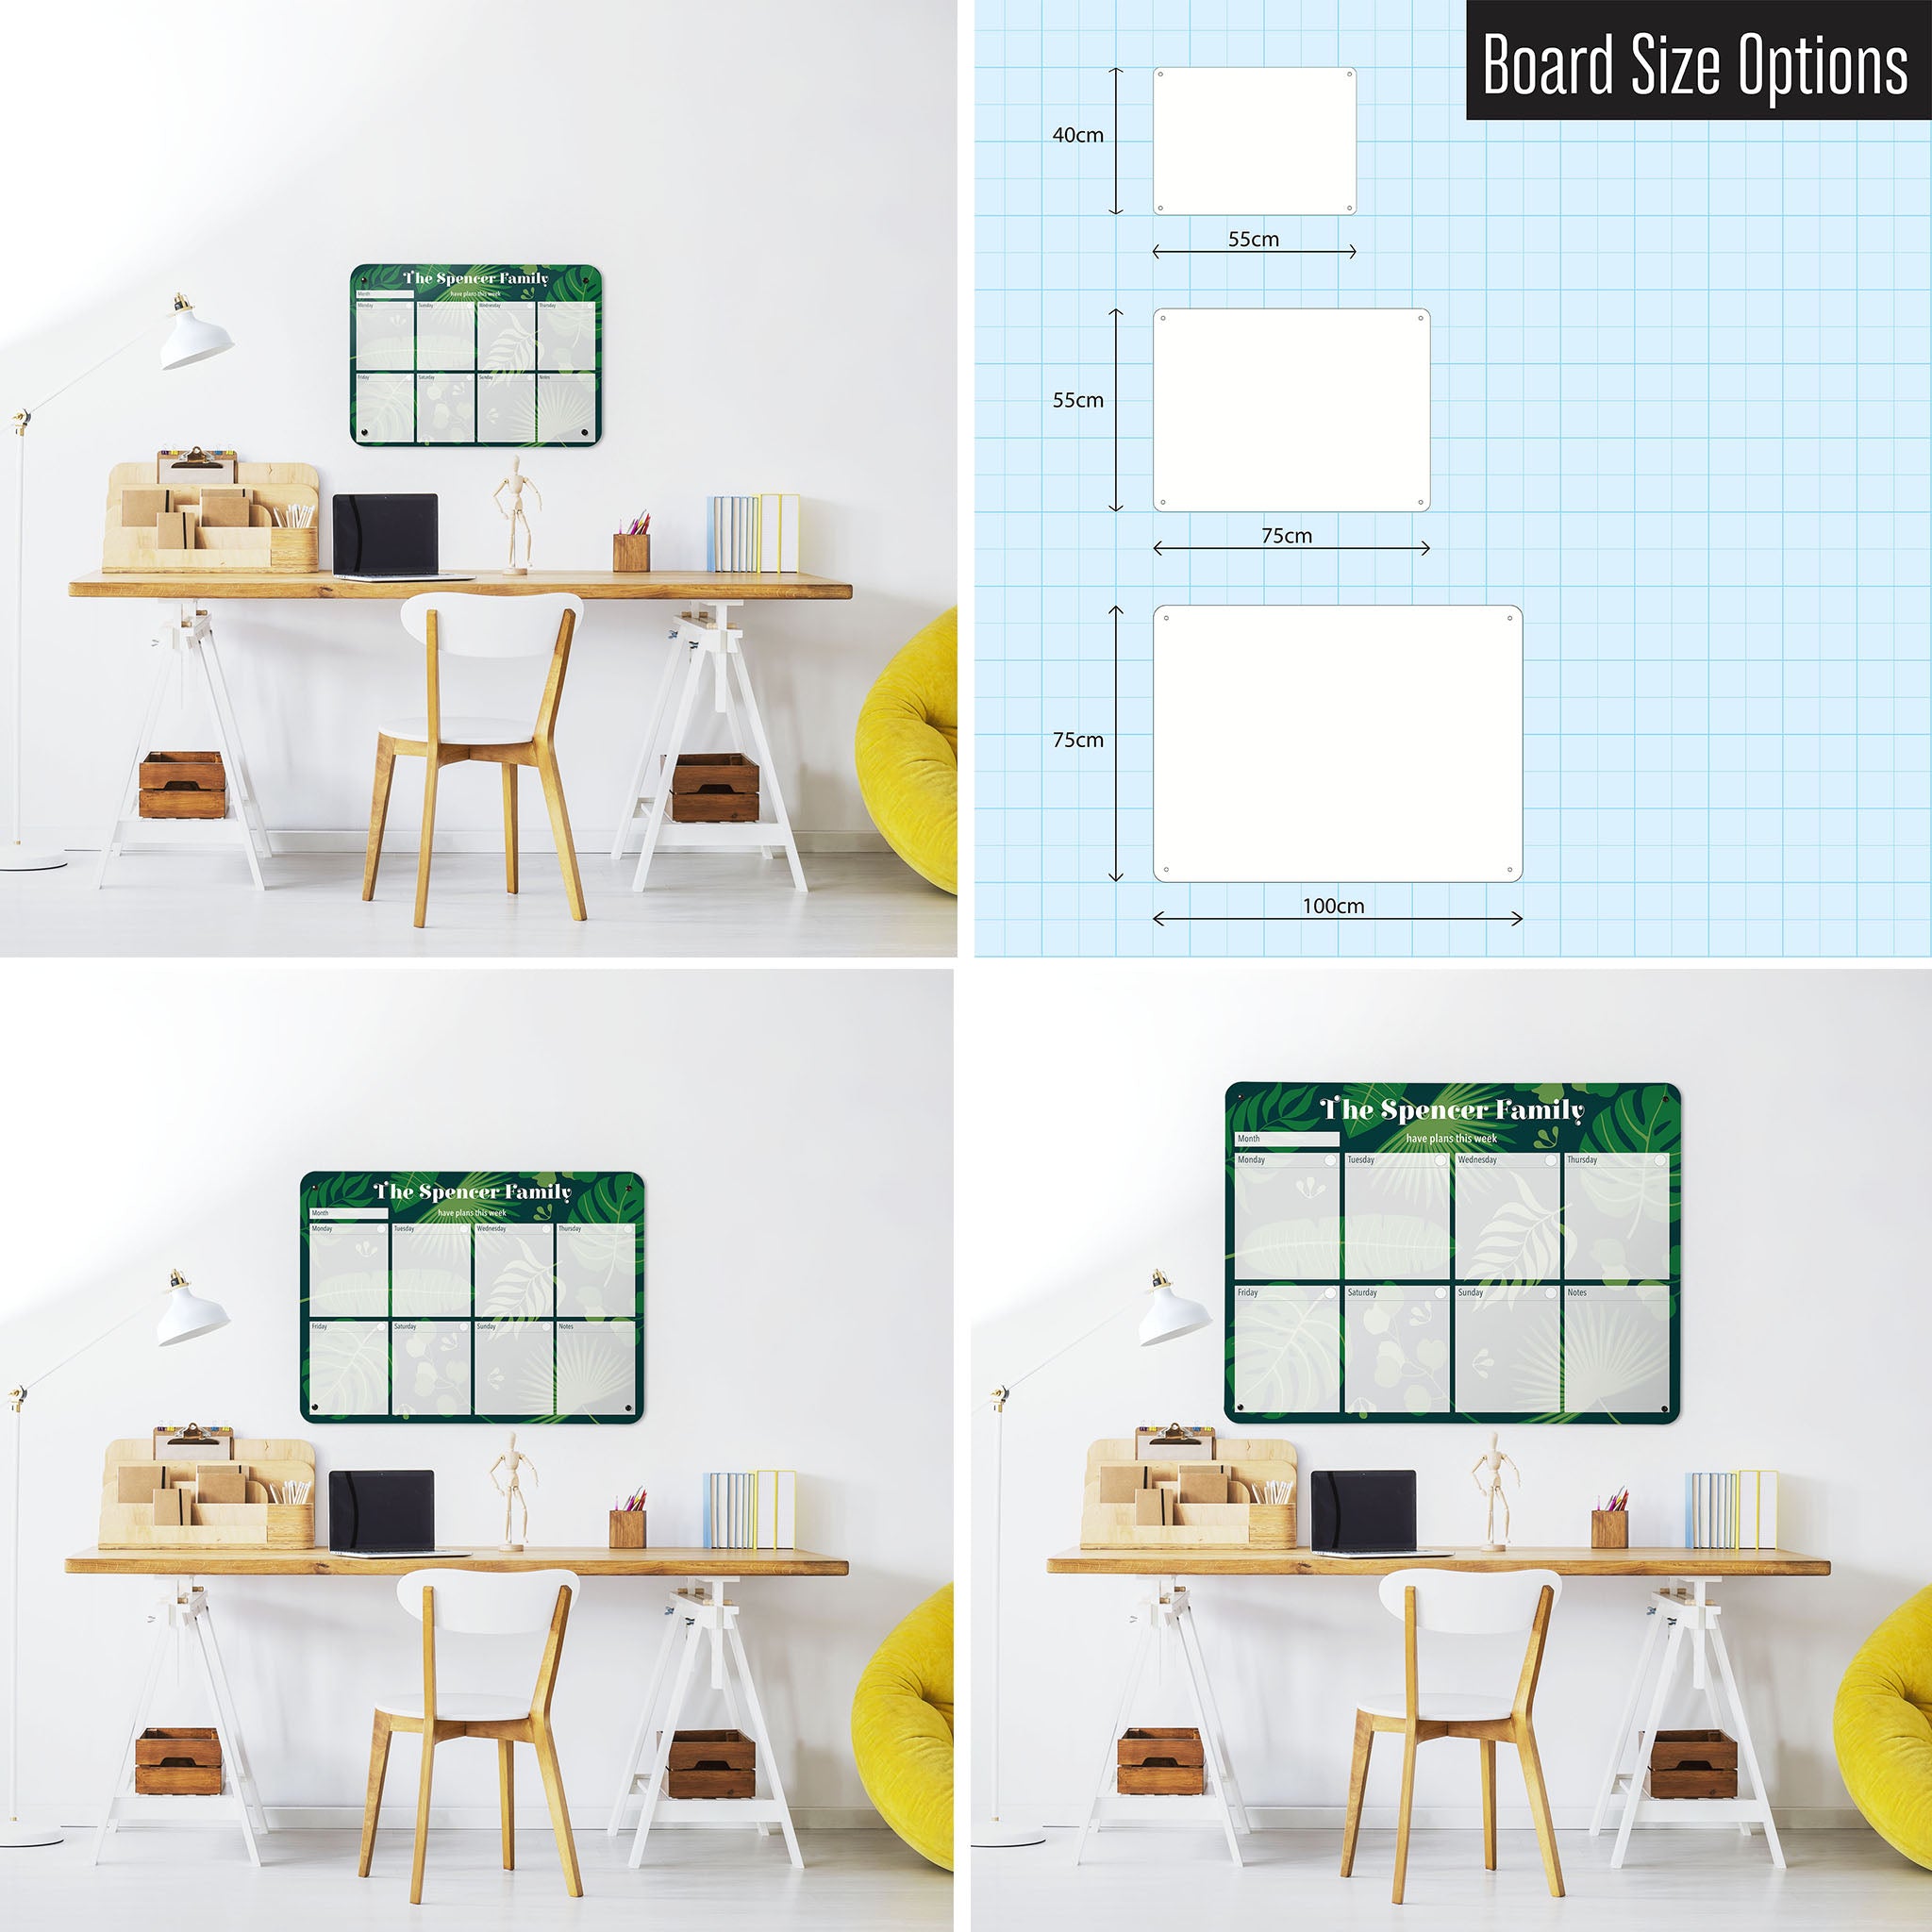 Three photographs of a workspace interior and a diagram to show size comparisons of a landscape tropical leaves design weekly planner personalised dry wipe magnetic notice board